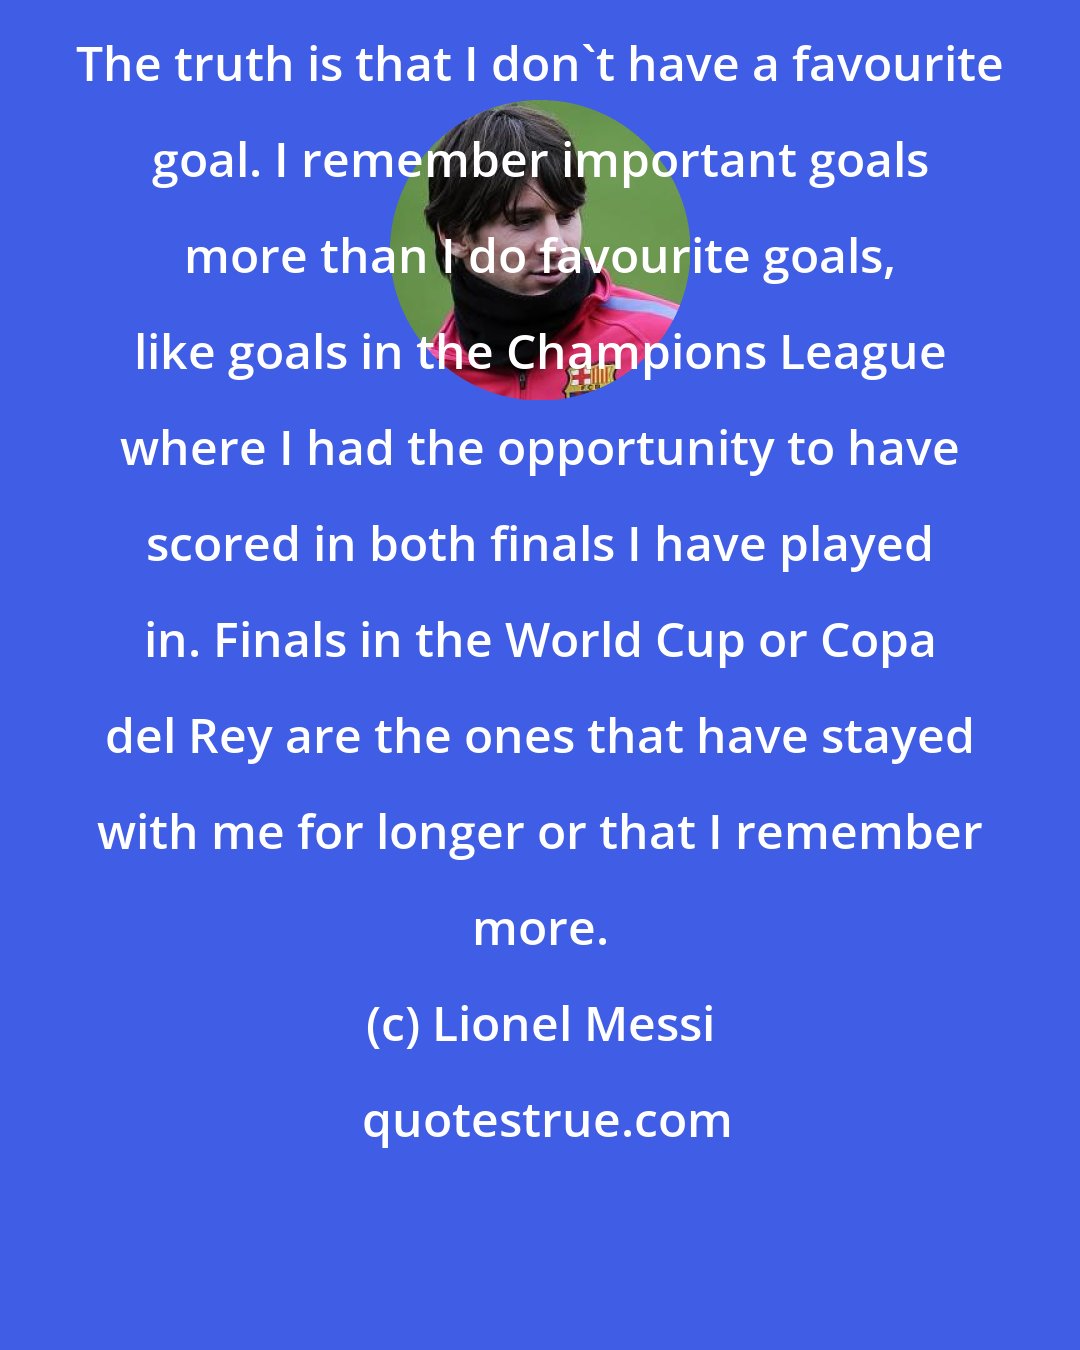 Lionel Messi: The truth is that I don't have a favourite goal. I remember important goals more than I do favourite goals, like goals in the Champions League where I had the opportunity to have scored in both finals I have played in. Finals in the World Cup or Copa del Rey are the ones that have stayed with me for longer or that I remember more.